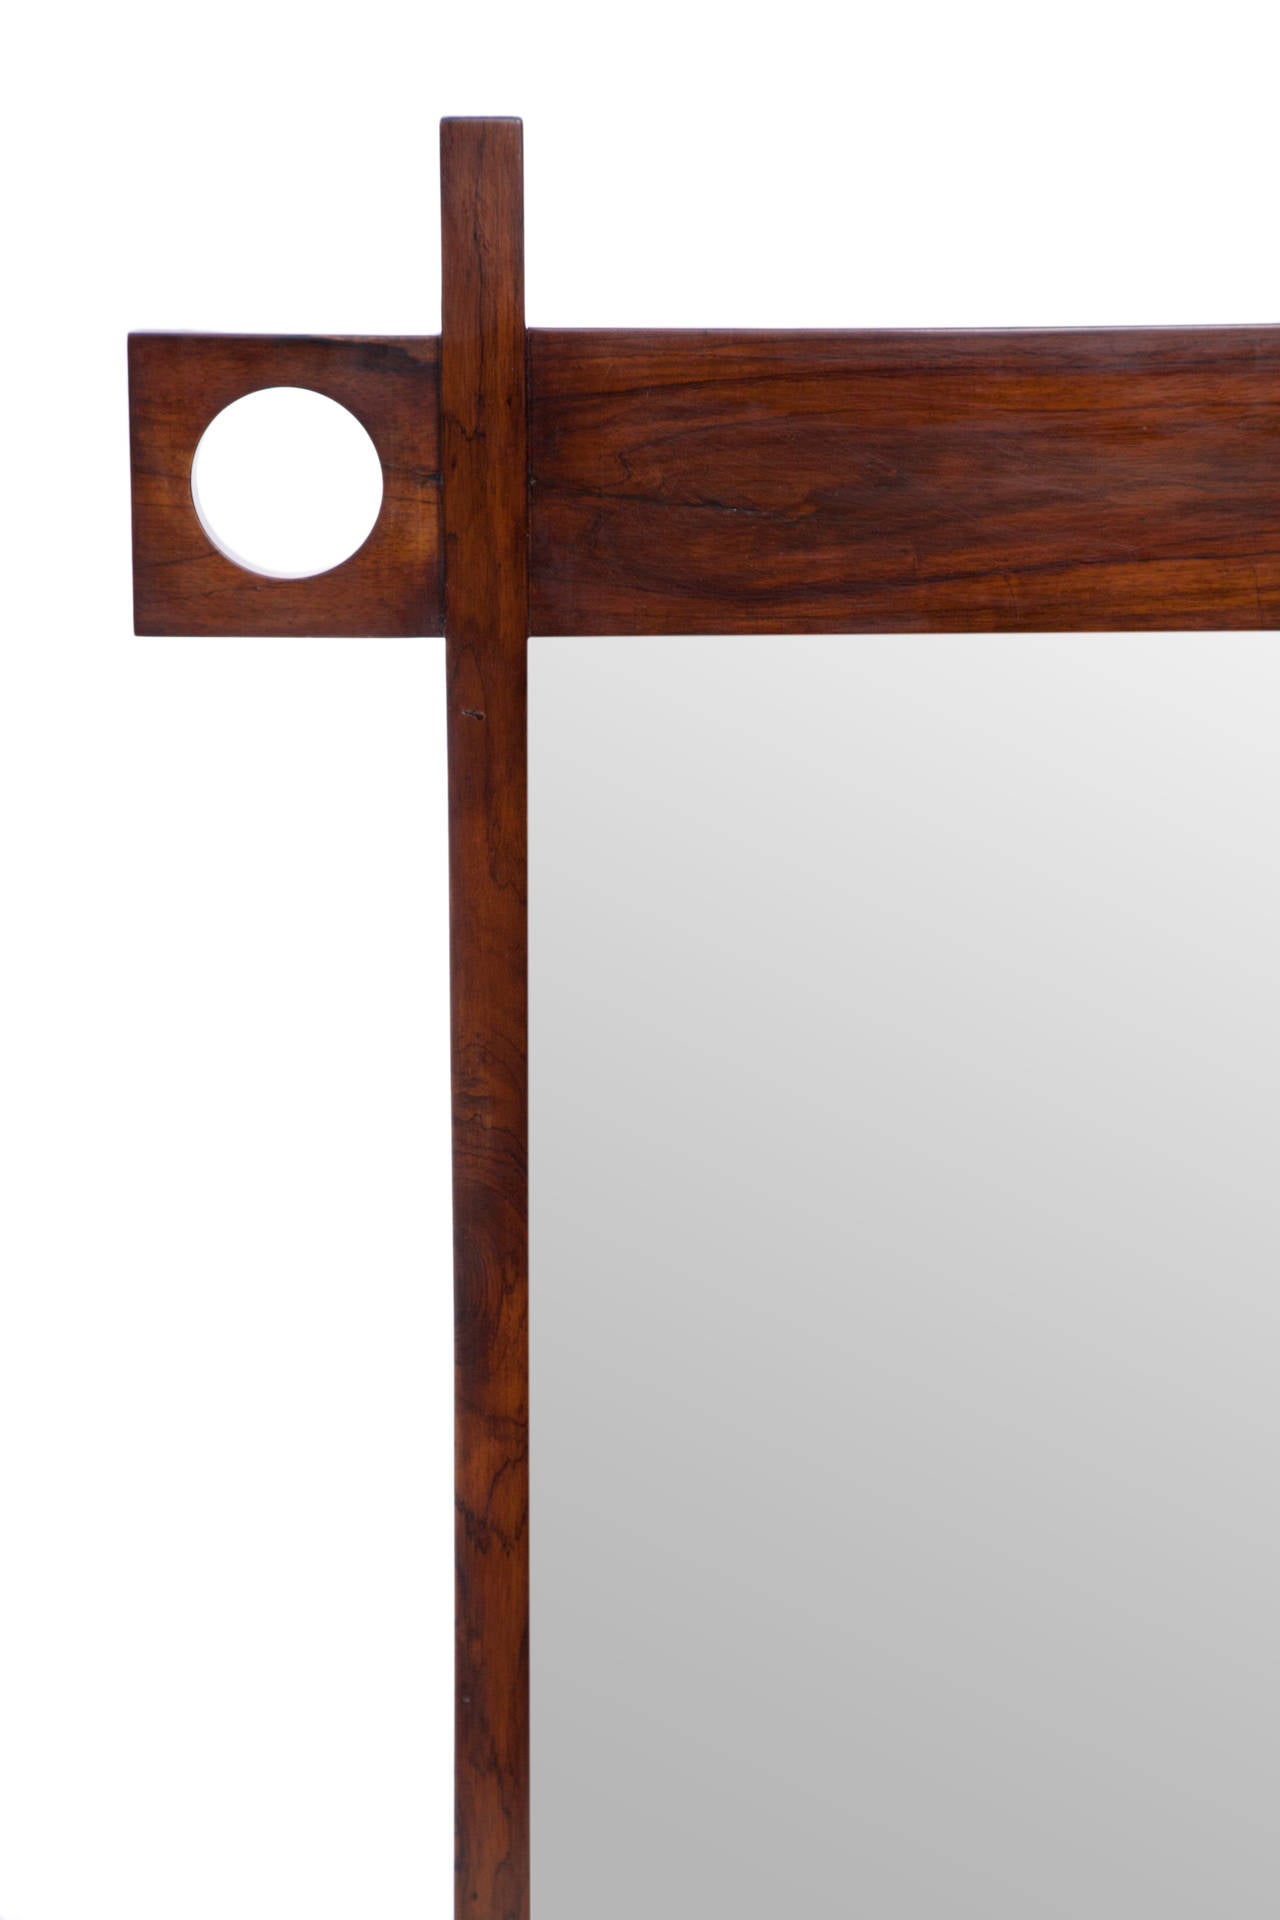 Brazilian Modern wall mirror, produced circa 1970s by architect and designer Sergio Rodrigues, from his Cuiabá series, glass set within a lacquered jacaranda wood frame. Very good vintage condition, with some presence of wear and cracking to the